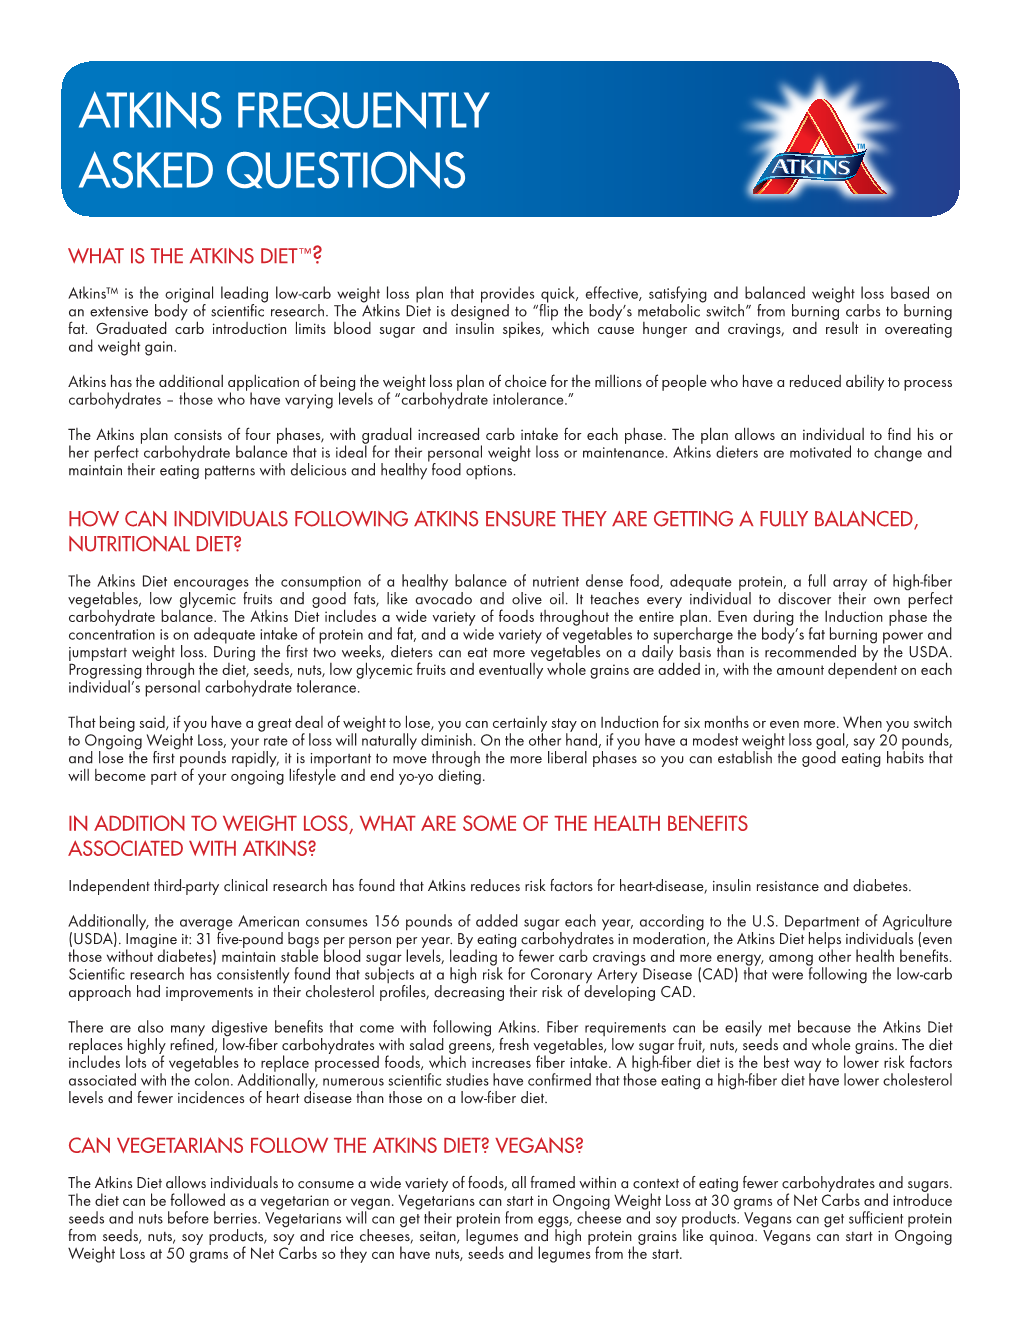 Atkins Frequently Asked Questions